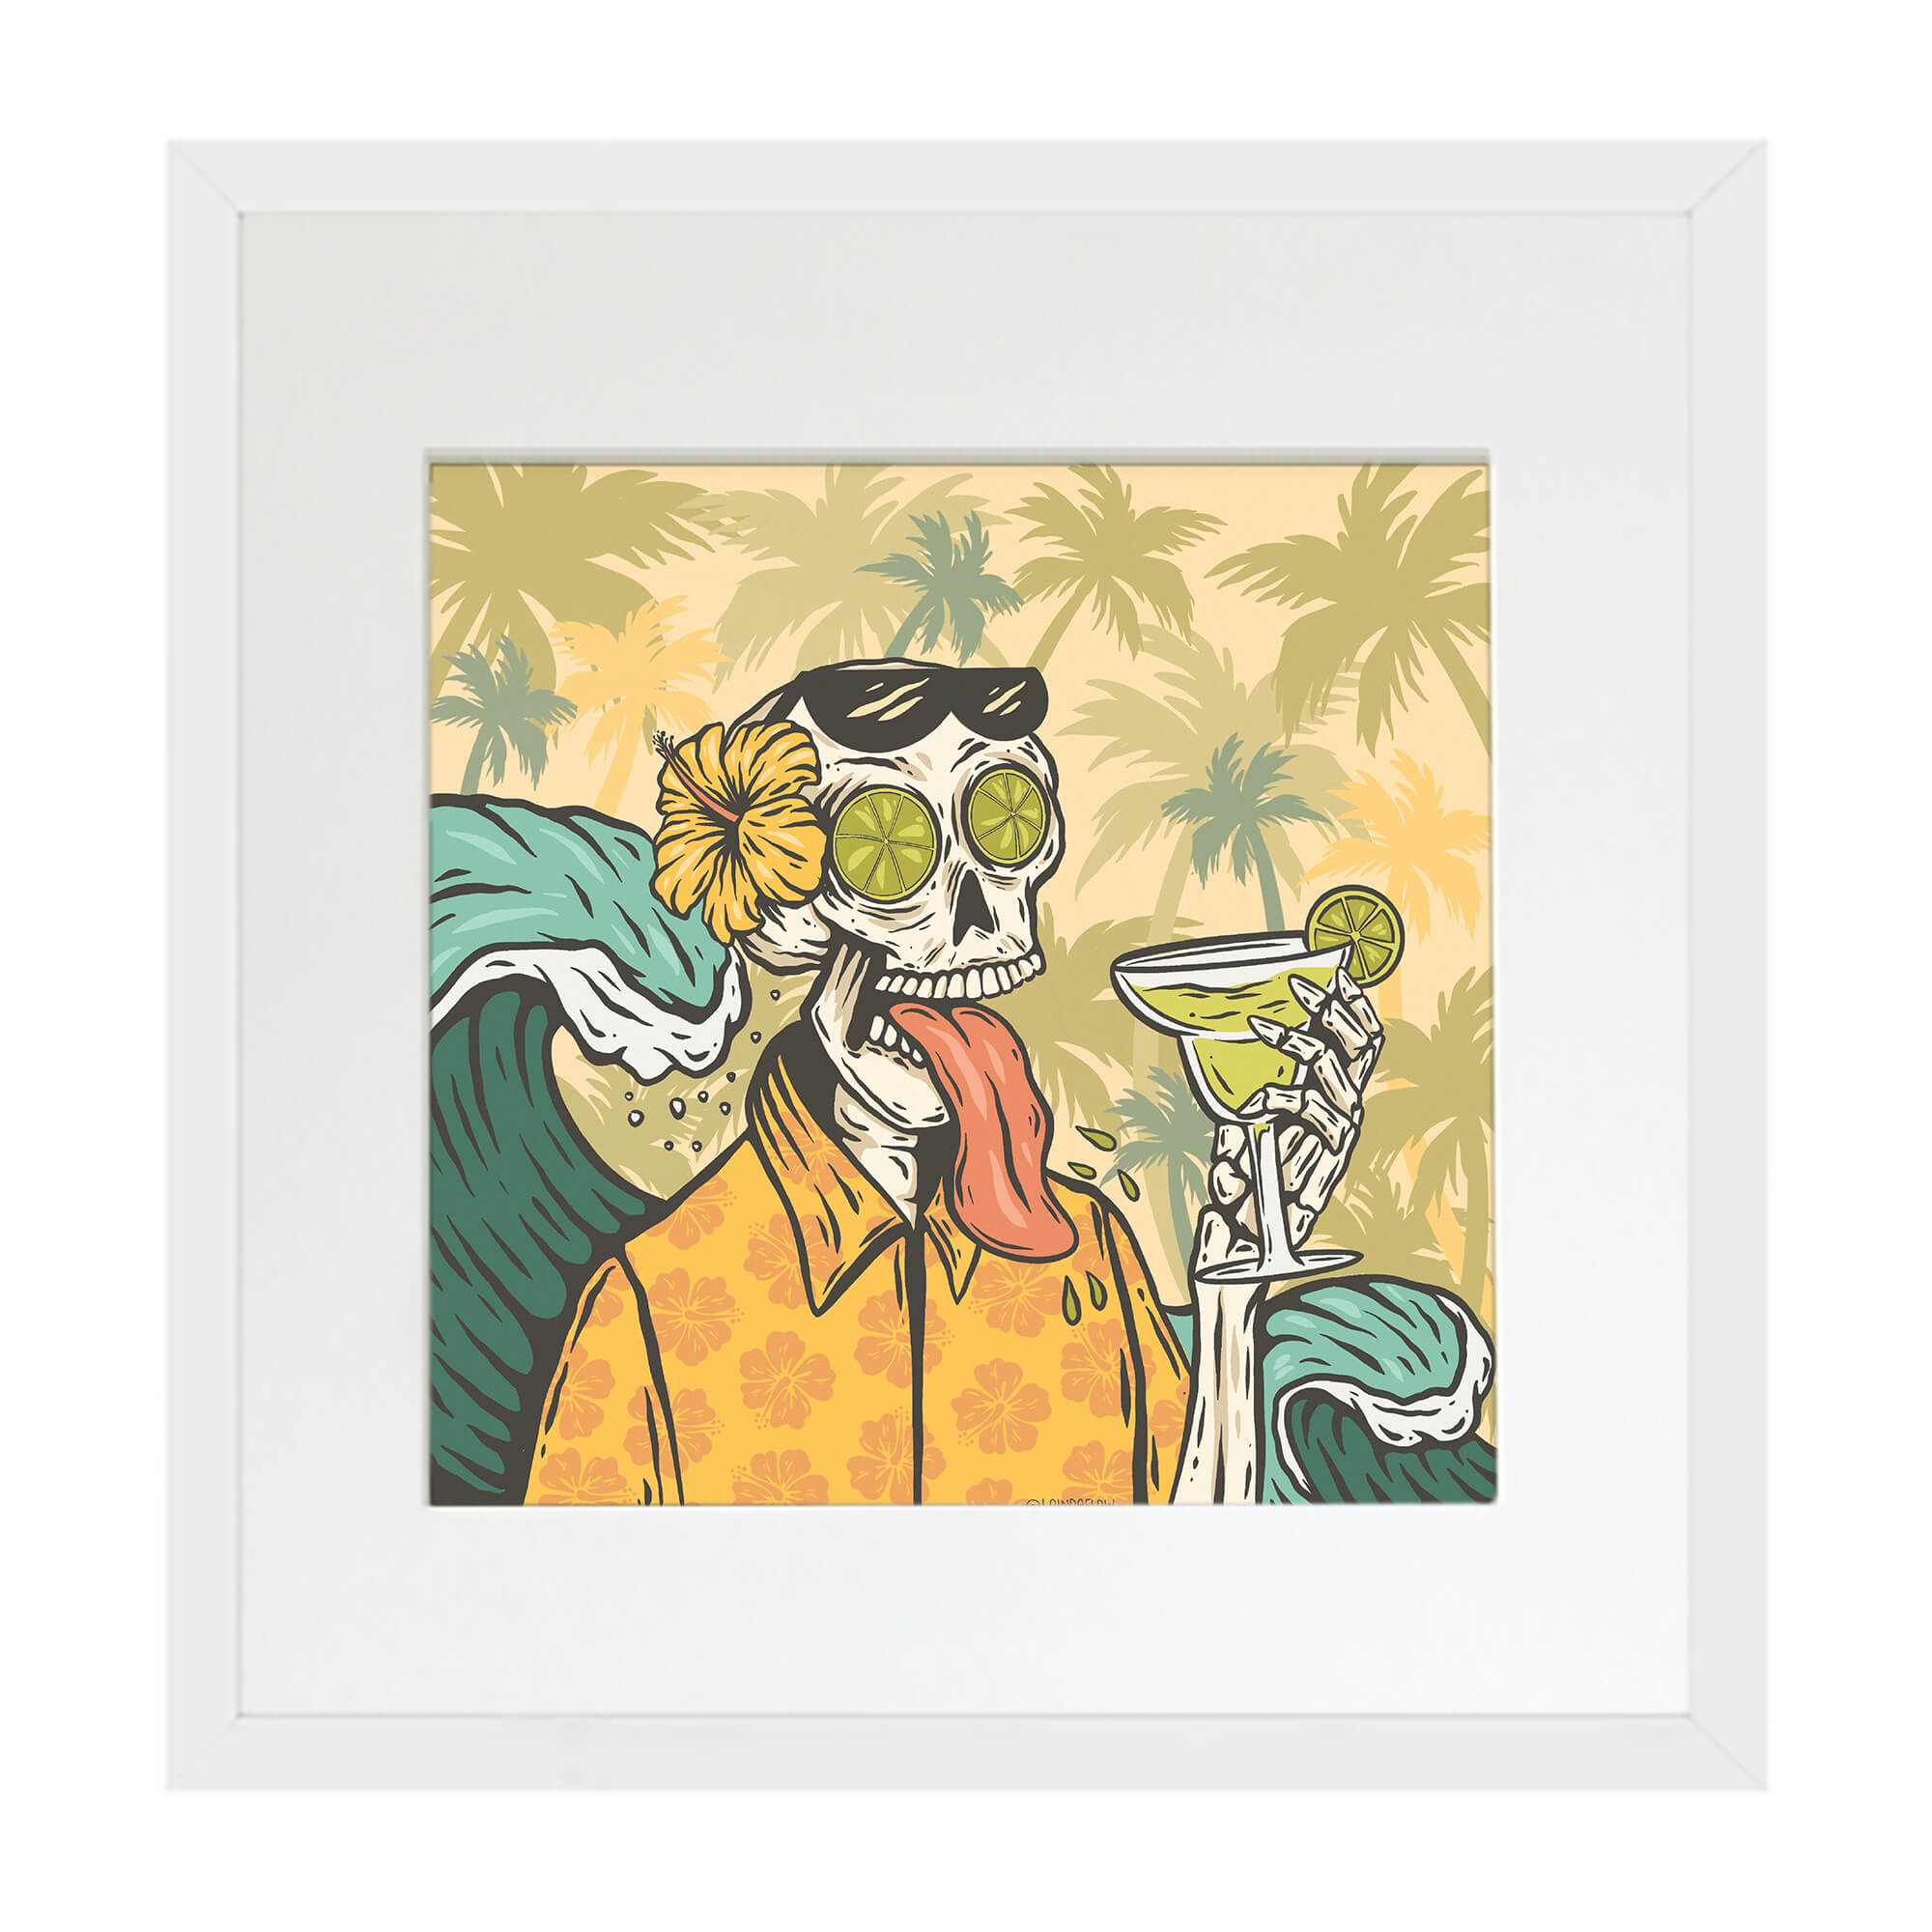 Matted art print with white frame of a skeleton man with lemon eyes and large crashing wavesby Hawaii artist Laihha Organna